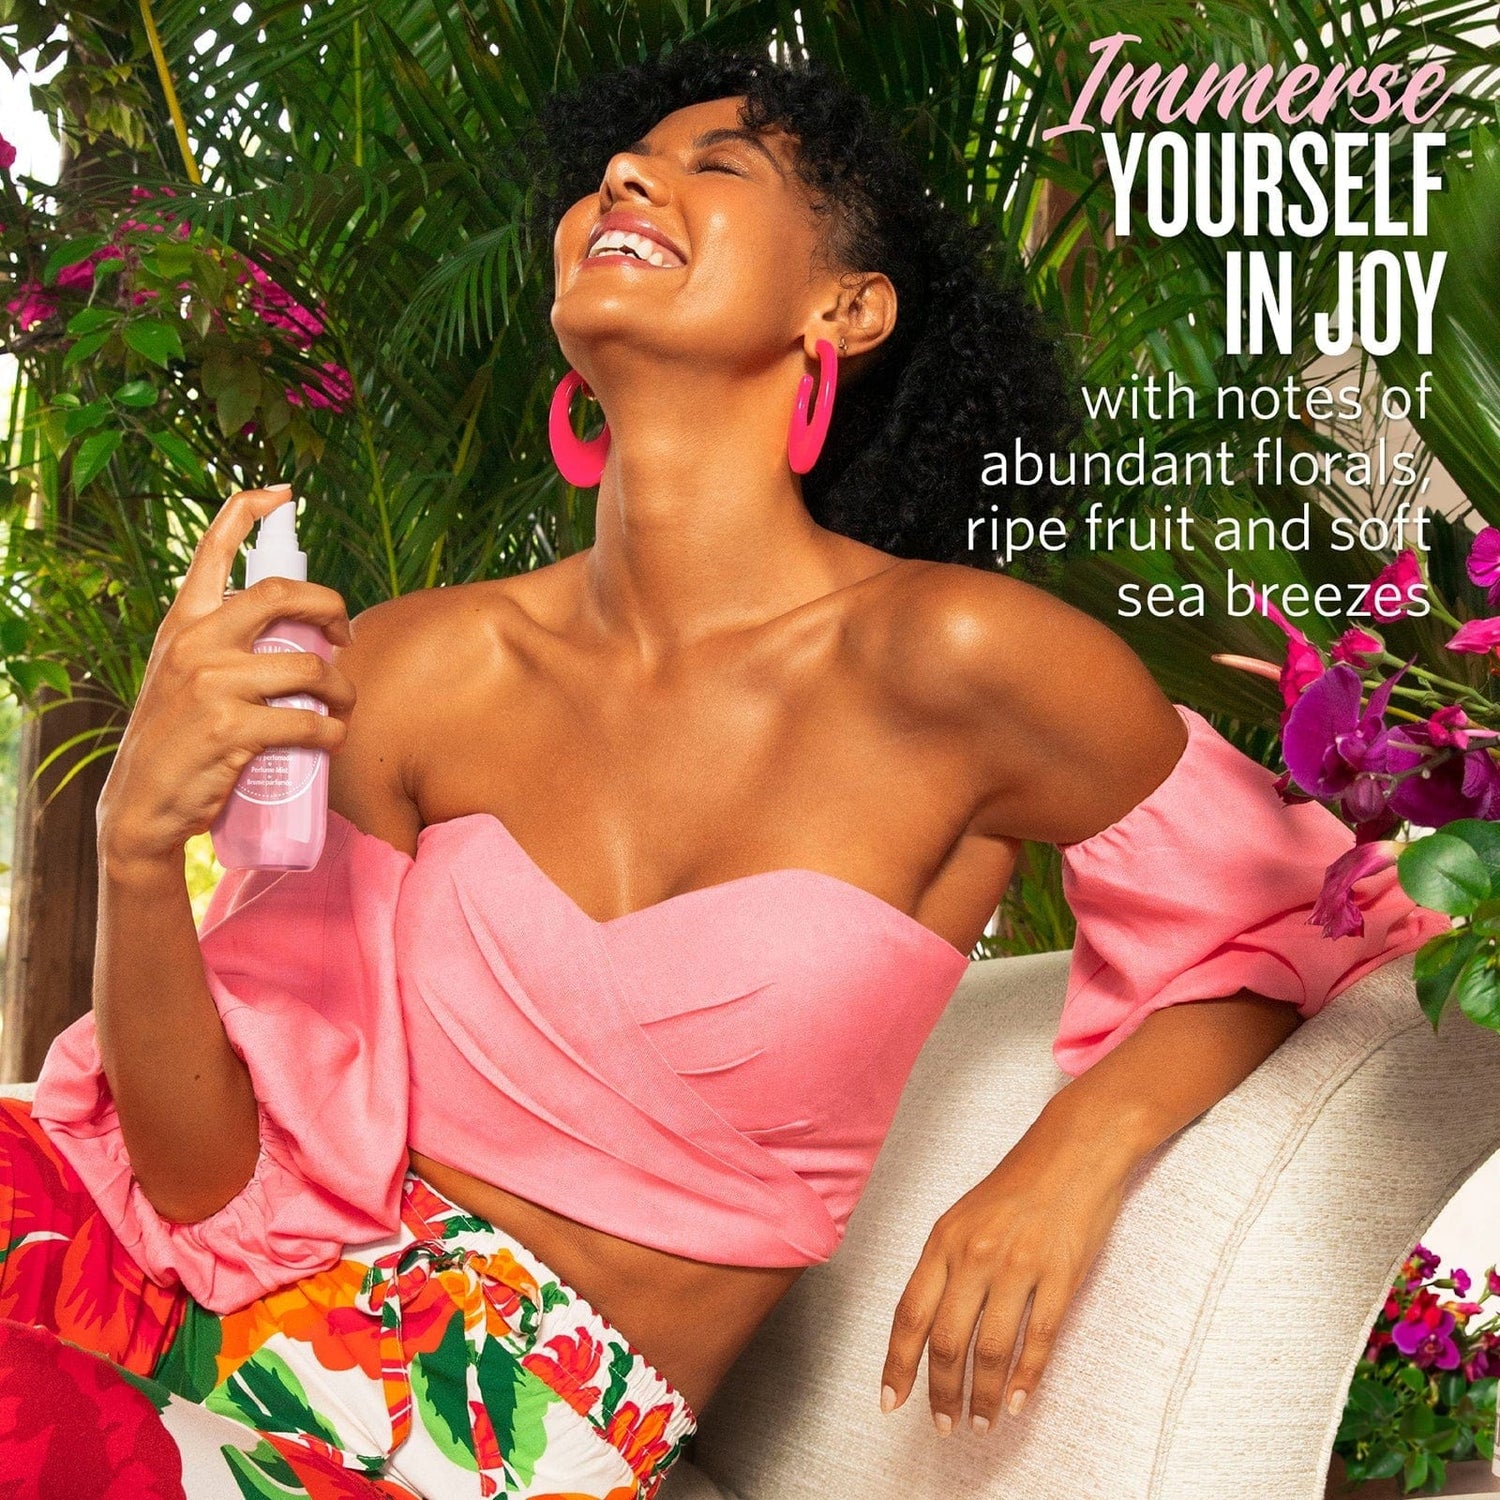 Immerse yourself in joy with nots of abundant florals, ripe fruit and soft sea breezes